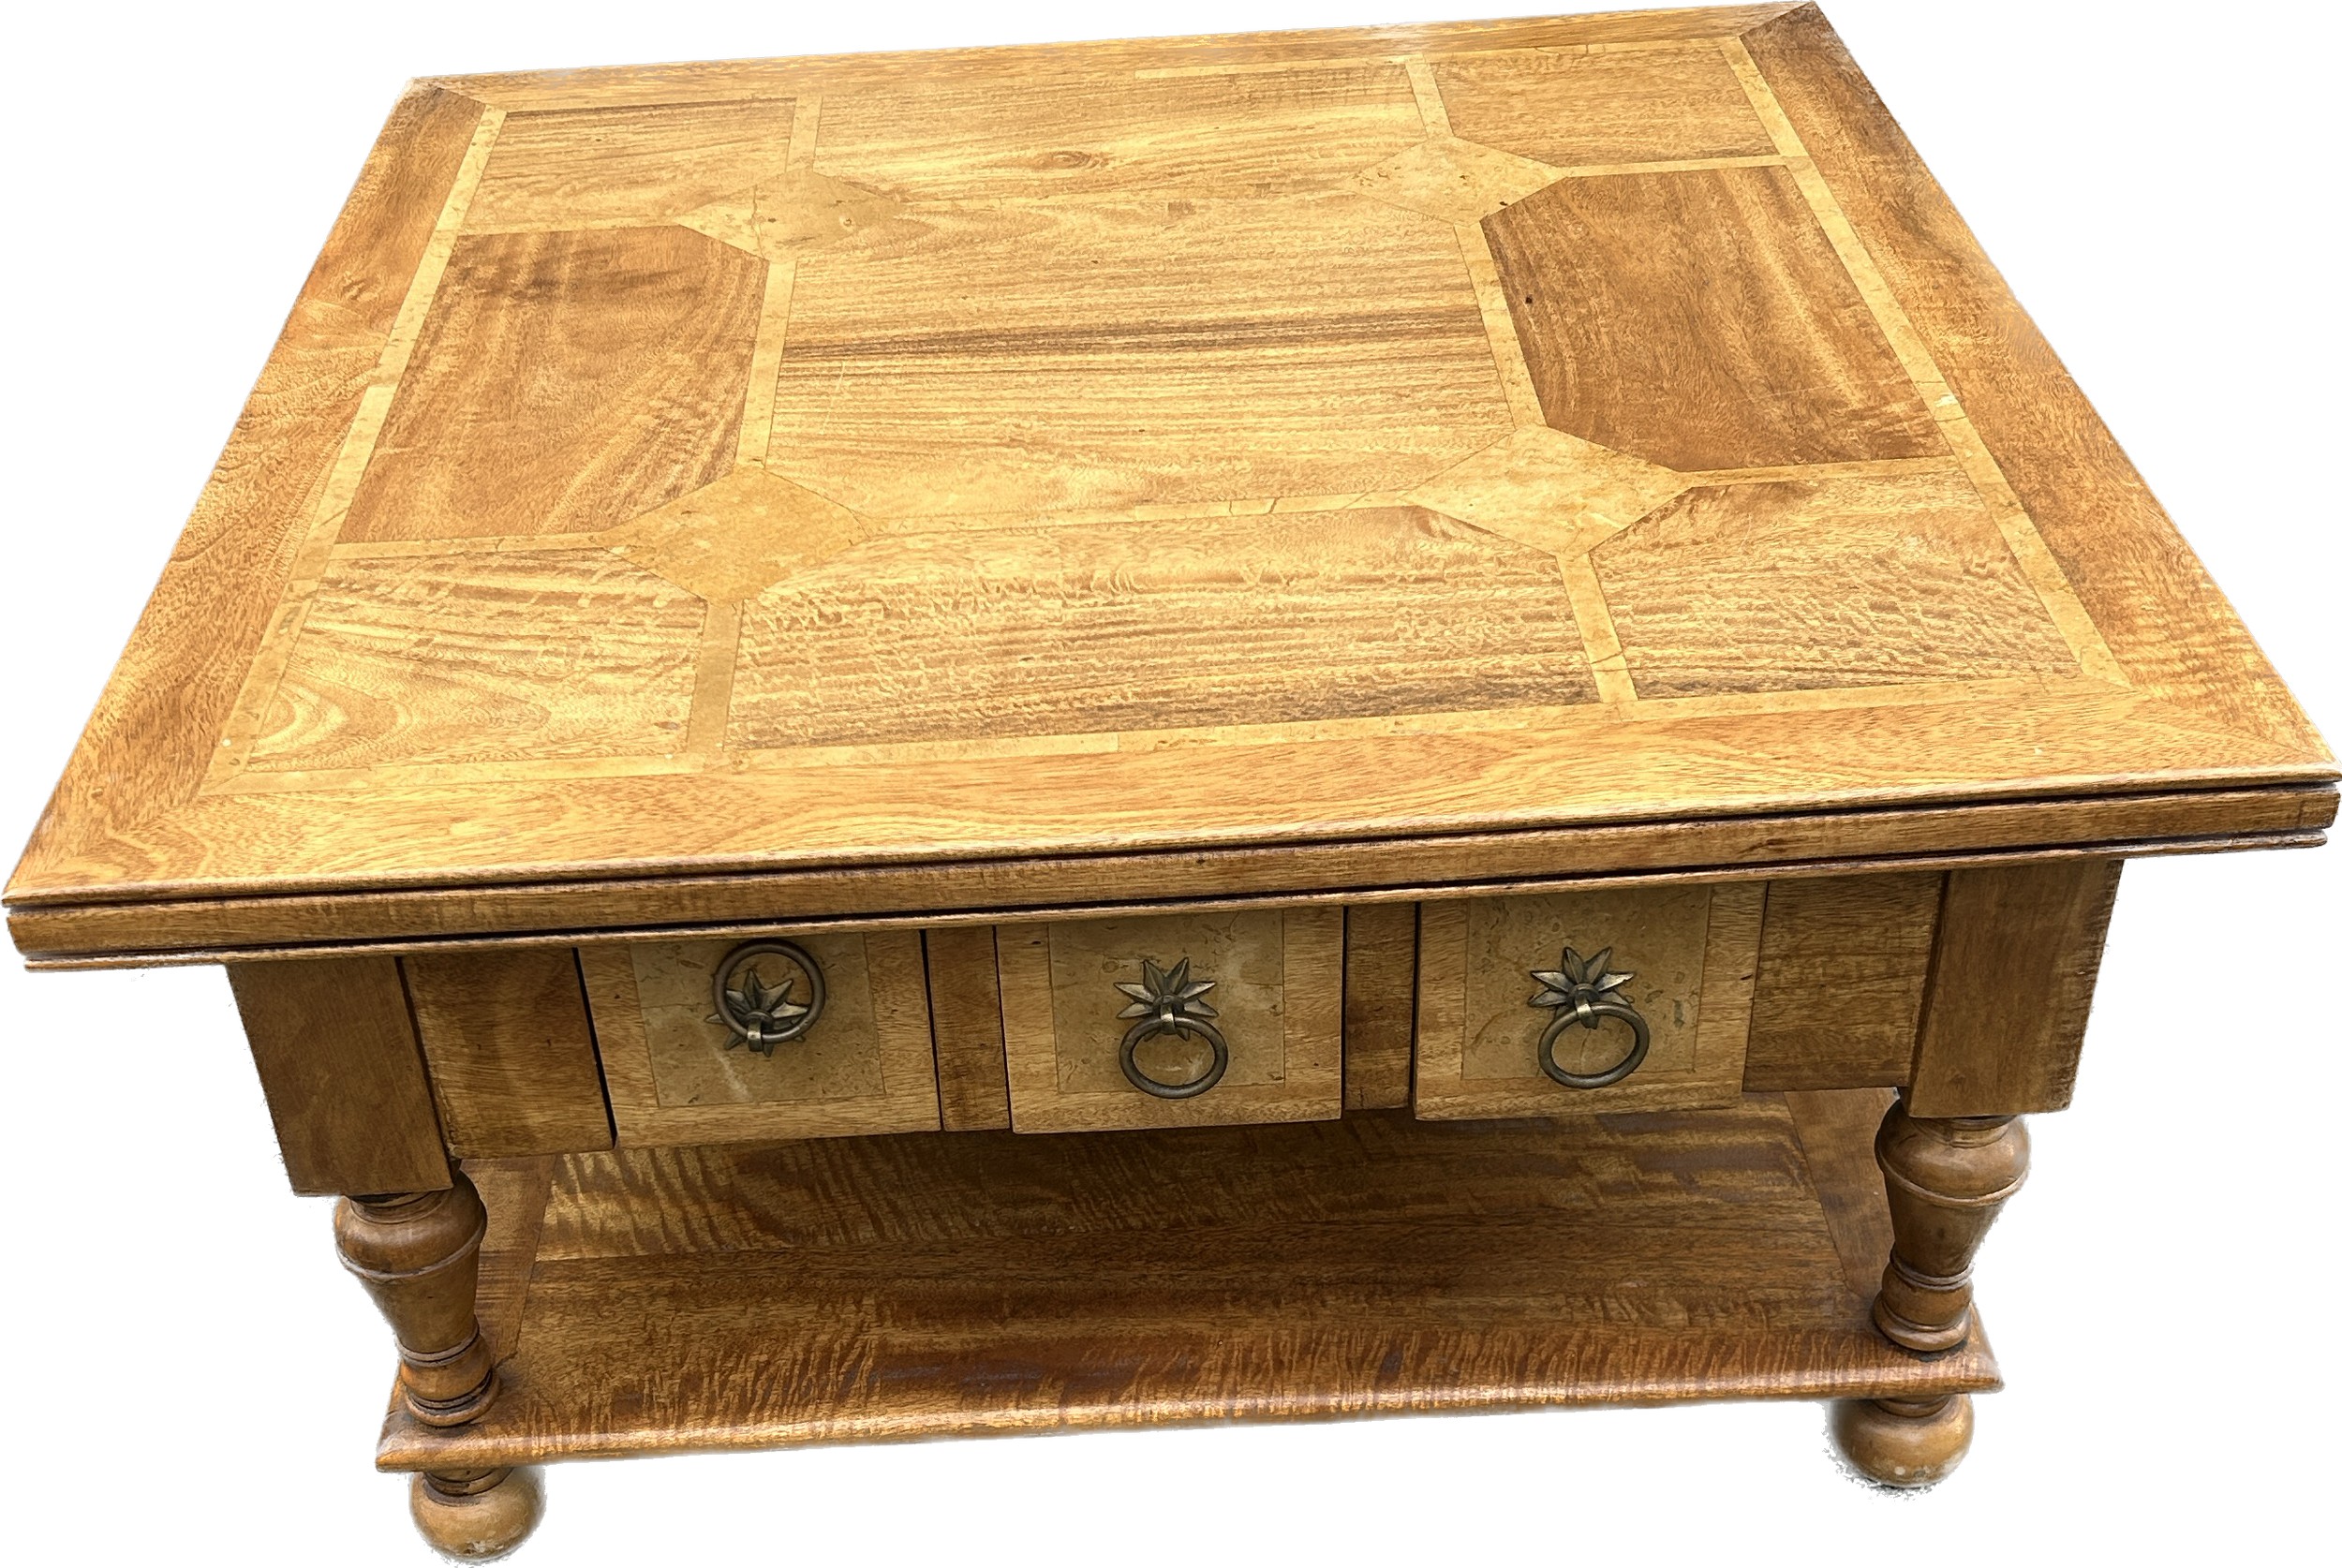 6 Drawer 2 tier large square inlaid coffee table, approximate measurements: 36 inches square, Height